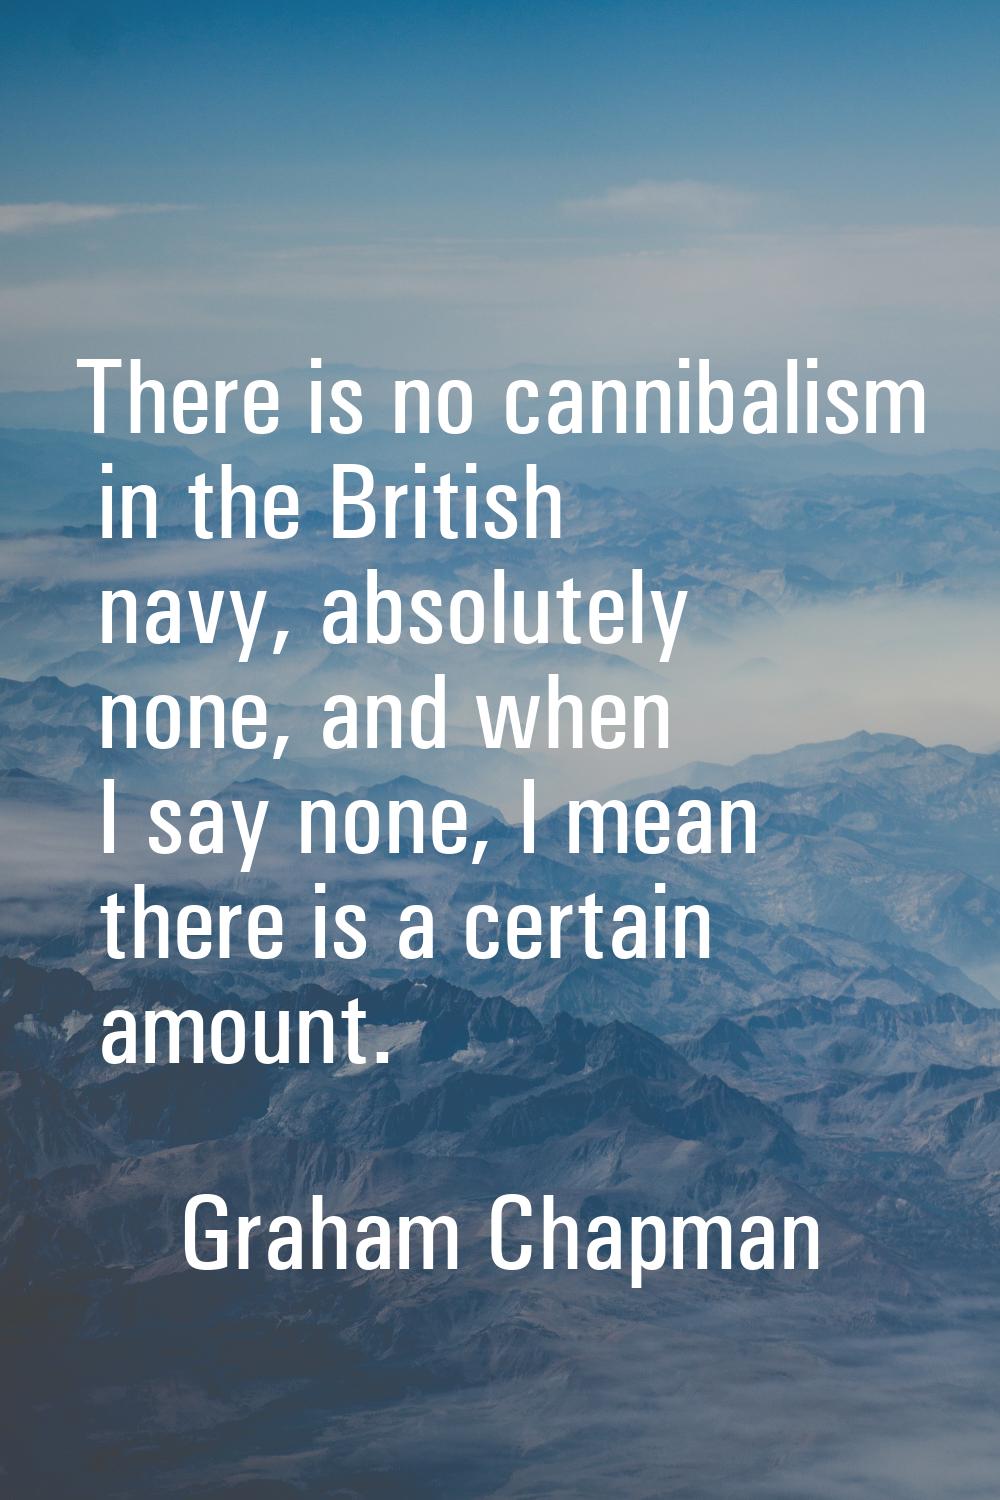 There is no cannibalism in the British navy, absolutely none, and when I say none, I mean there is 